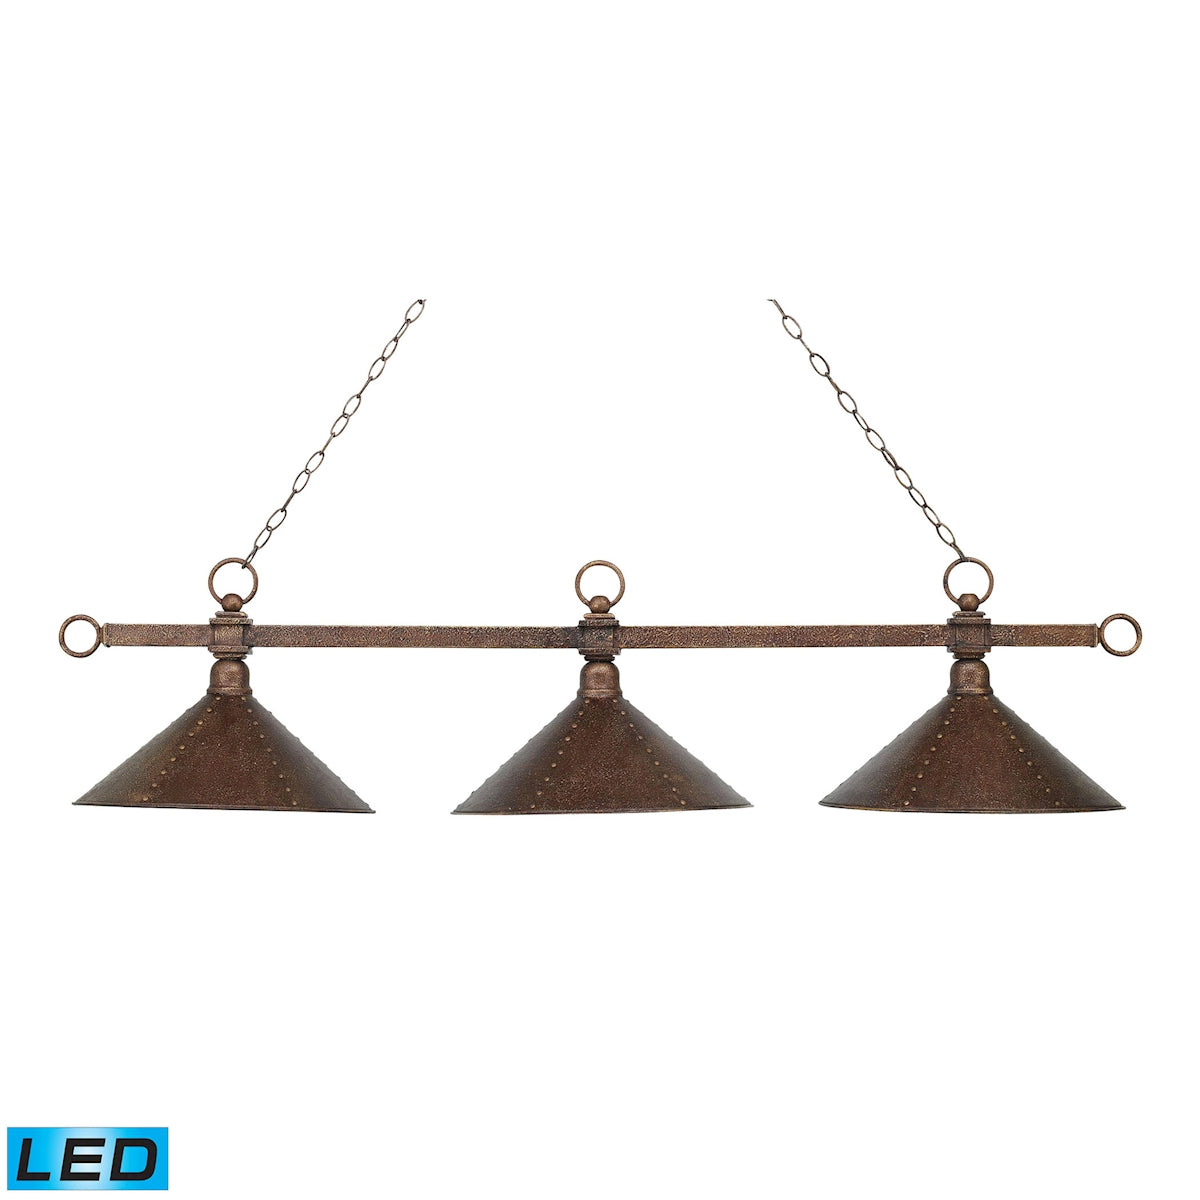 ELK Lighting 182-AC-M2-LED Designer Classics 3-Light Island Light in Copper with Hammered Iron Shades - Includes LED Bulbs